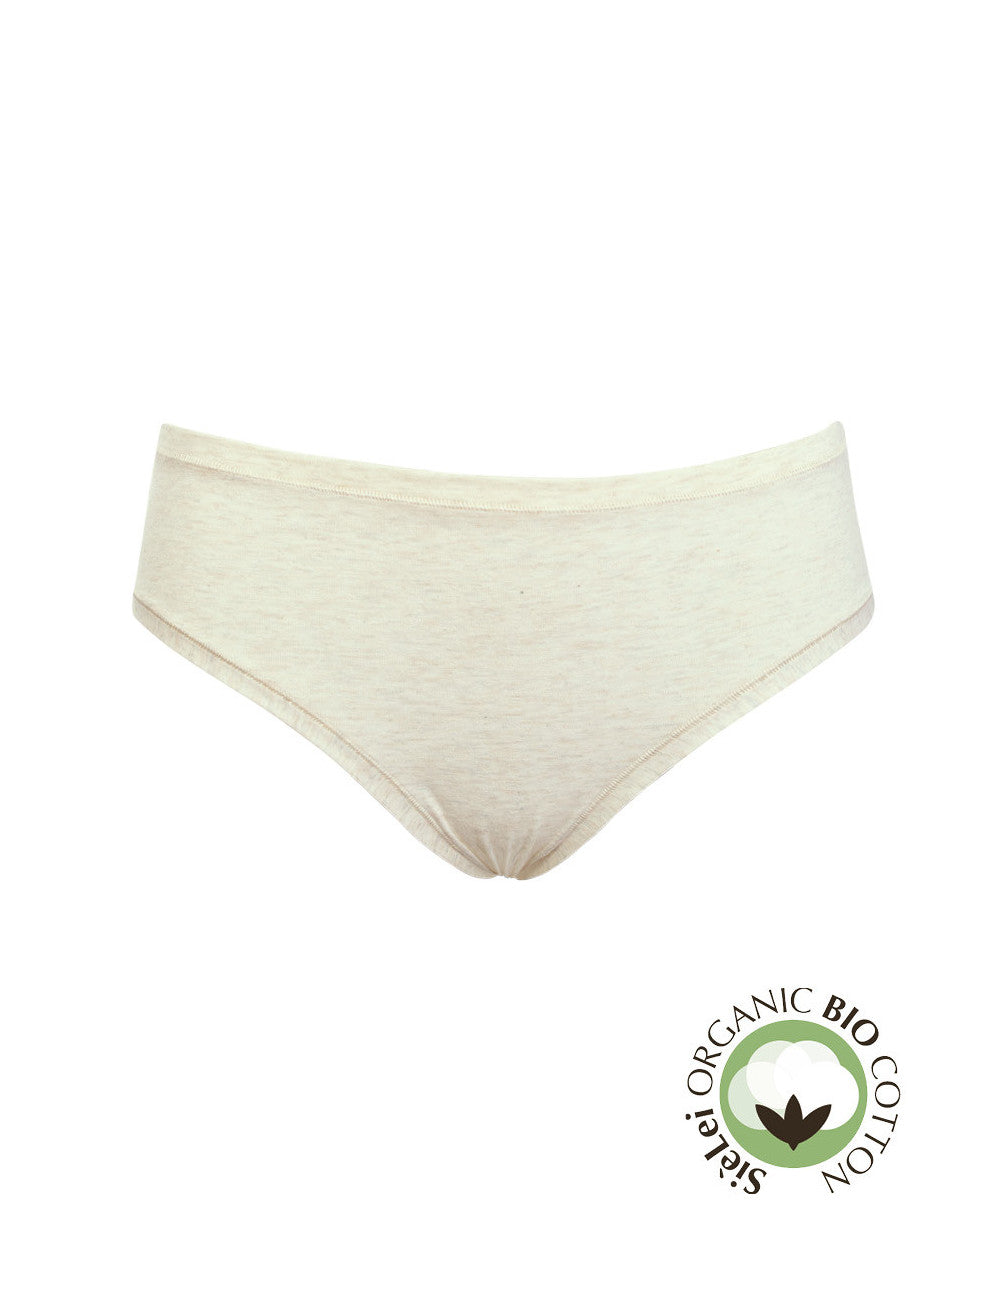 SIéLEI's Organic Cotton Full Brief from Italy are crafted with hand-picked organic cotton to create a thin, soft, stretchy fabric, while promoting environmental sustainability.